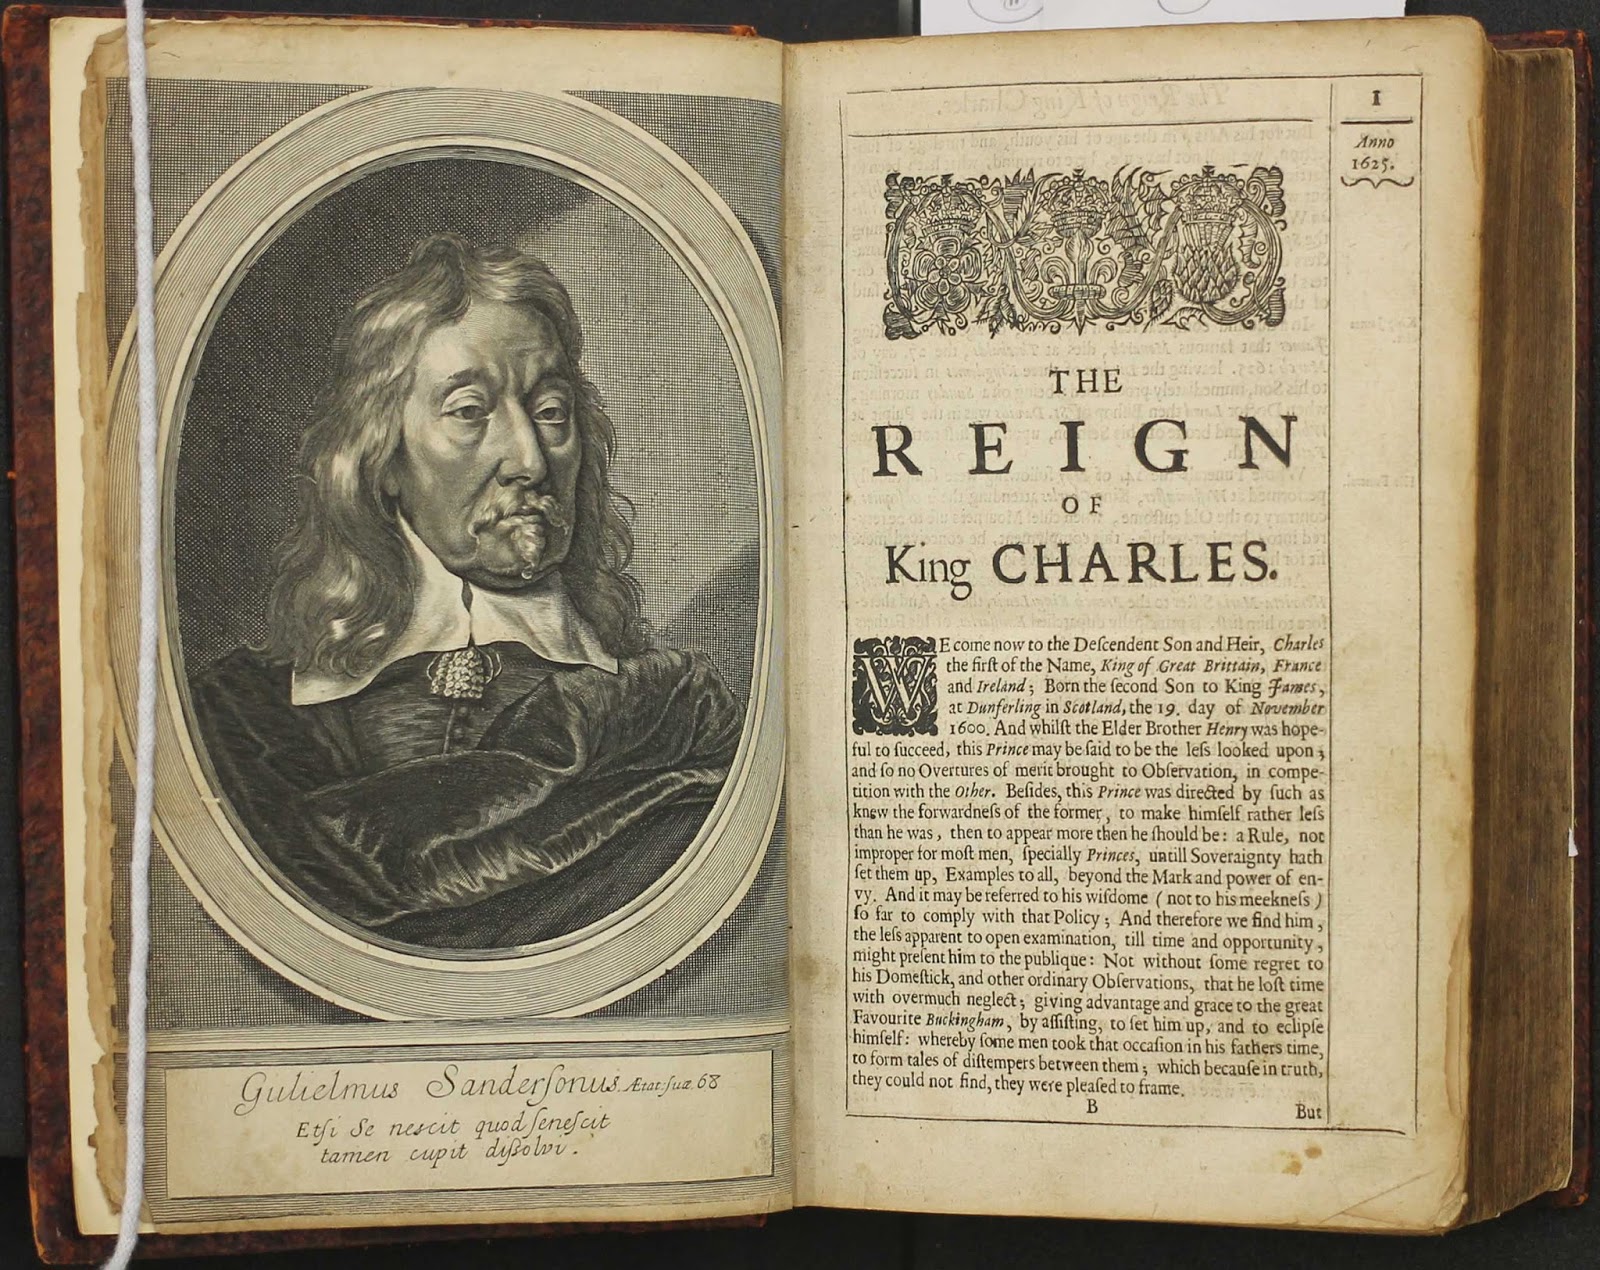 The Reign of King Charles, Frontispiece and Page 1 with engraving of King Charles and decorated initial letter